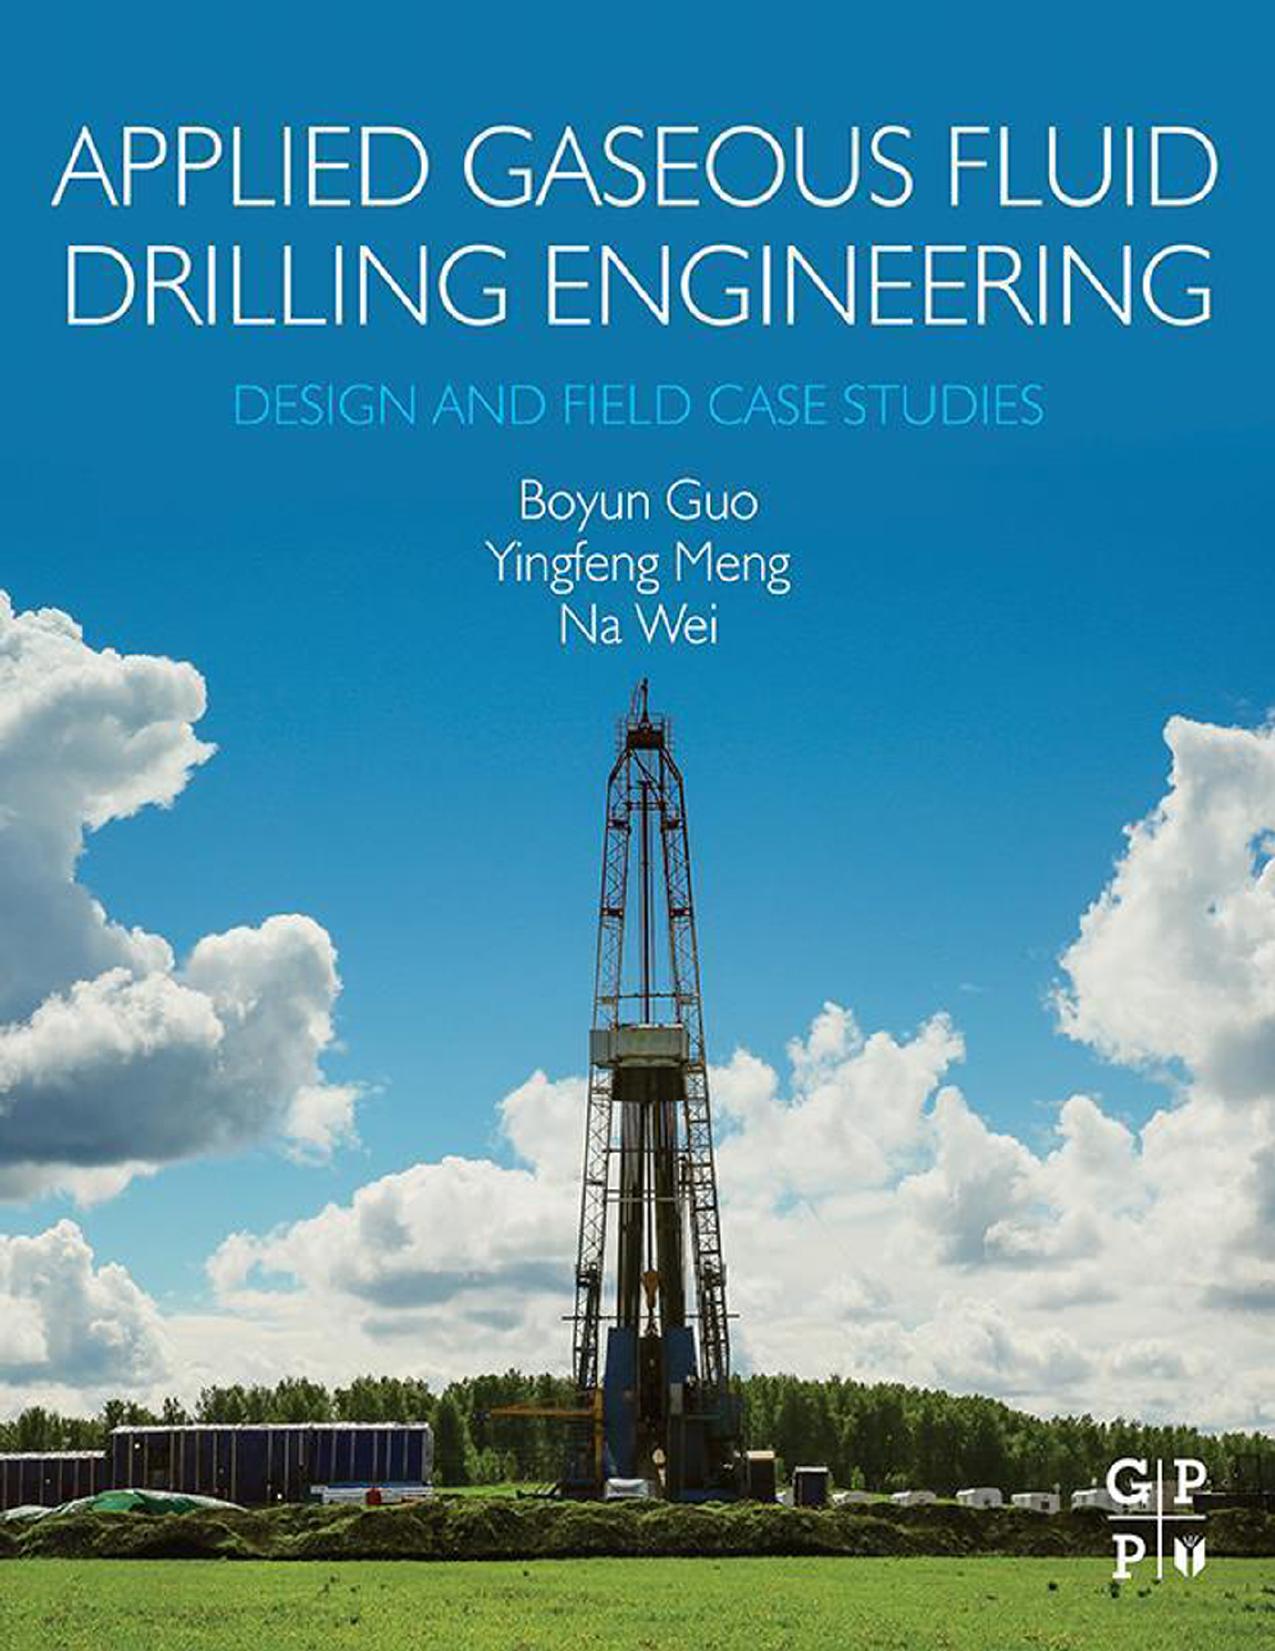 (eBook PDF)Applied Gaseous Fluid Drilling Engineering: Design and Field Case Studies by Boyun Guo,Yingfeng Meng,Na Wei